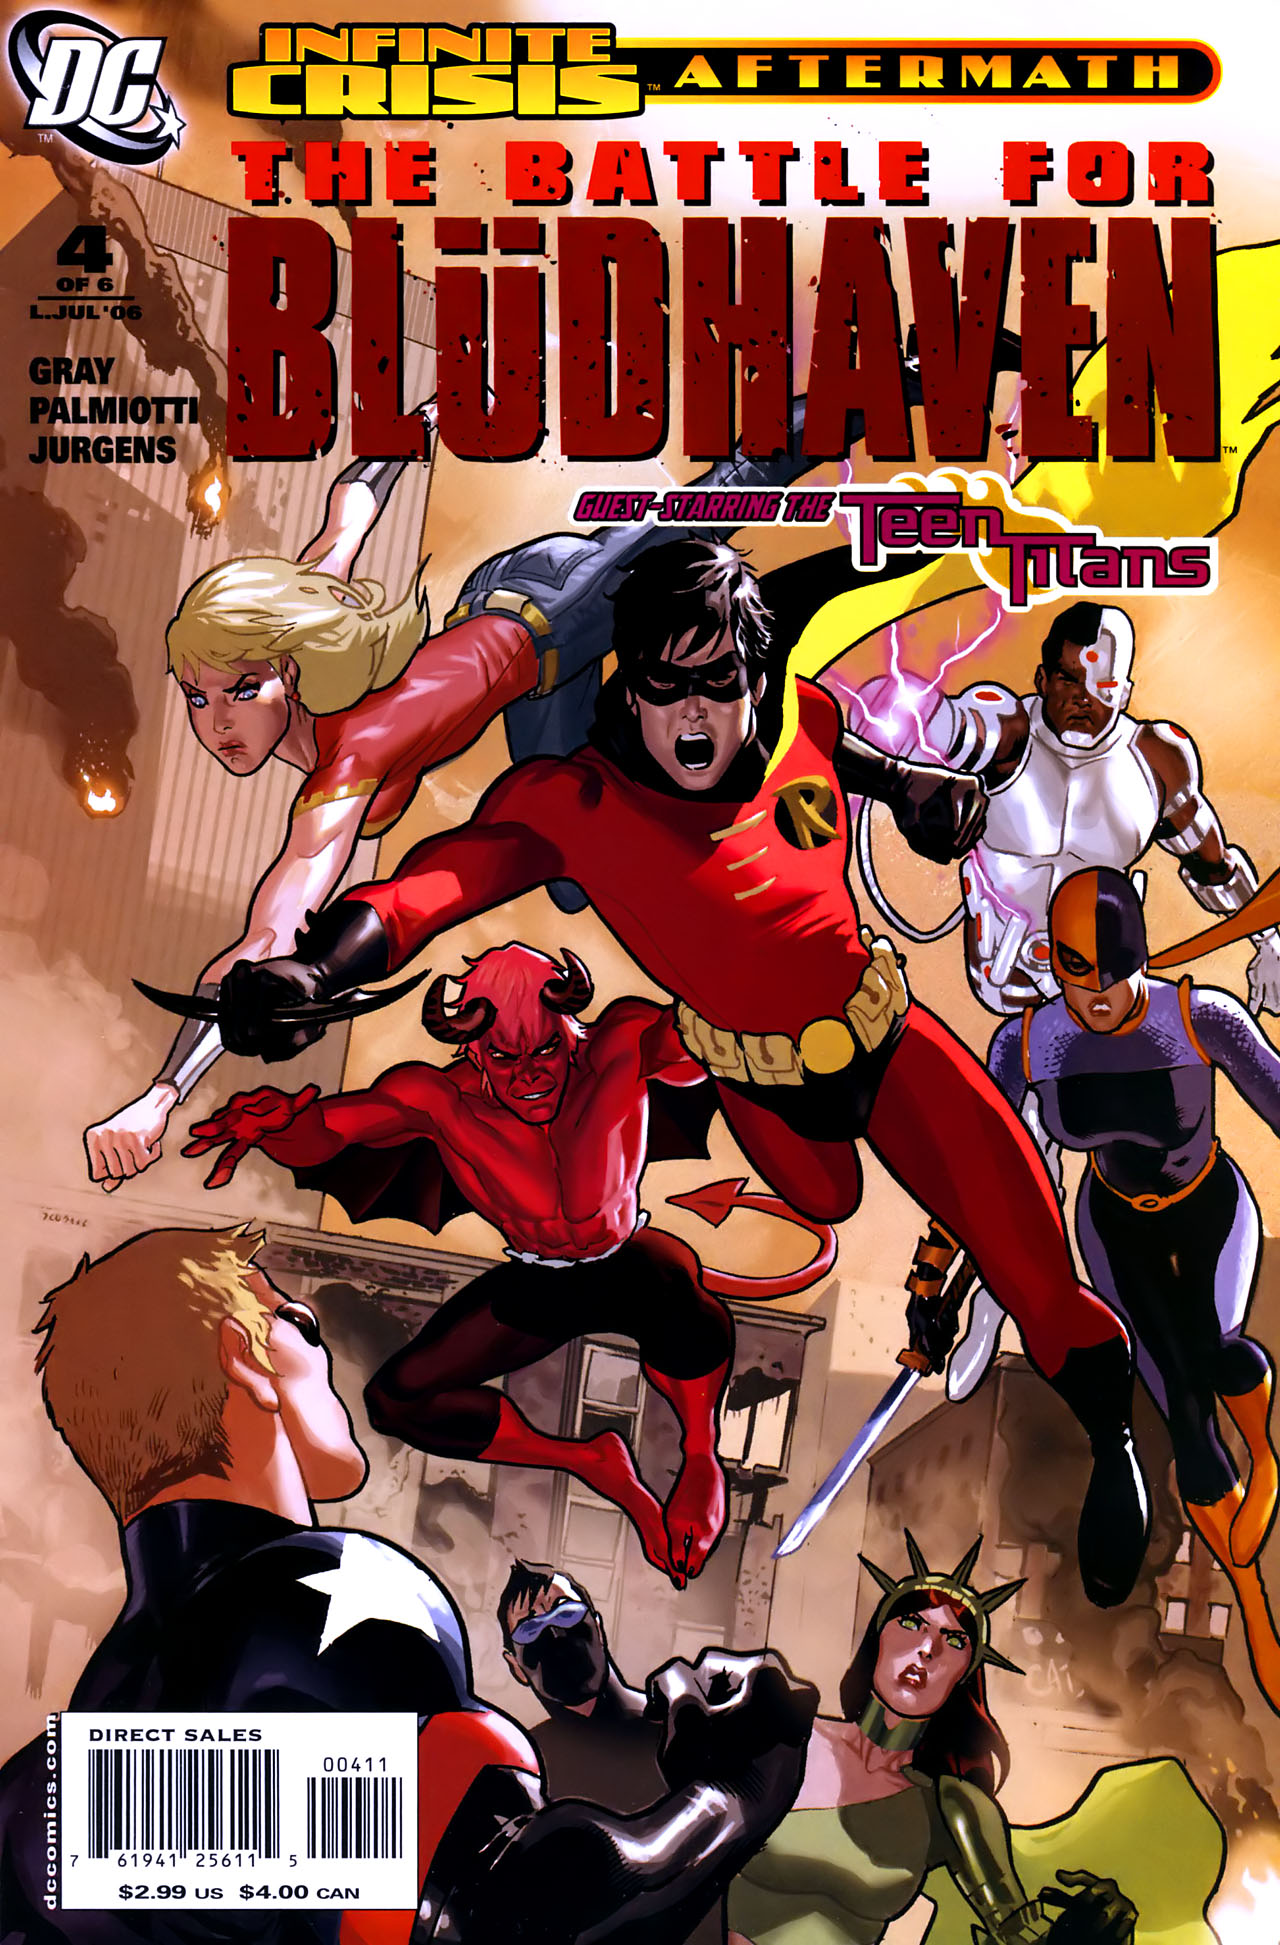 Read online Crisis Aftermath: The Battle for Bludhaven comic -  Issue #4 - 1